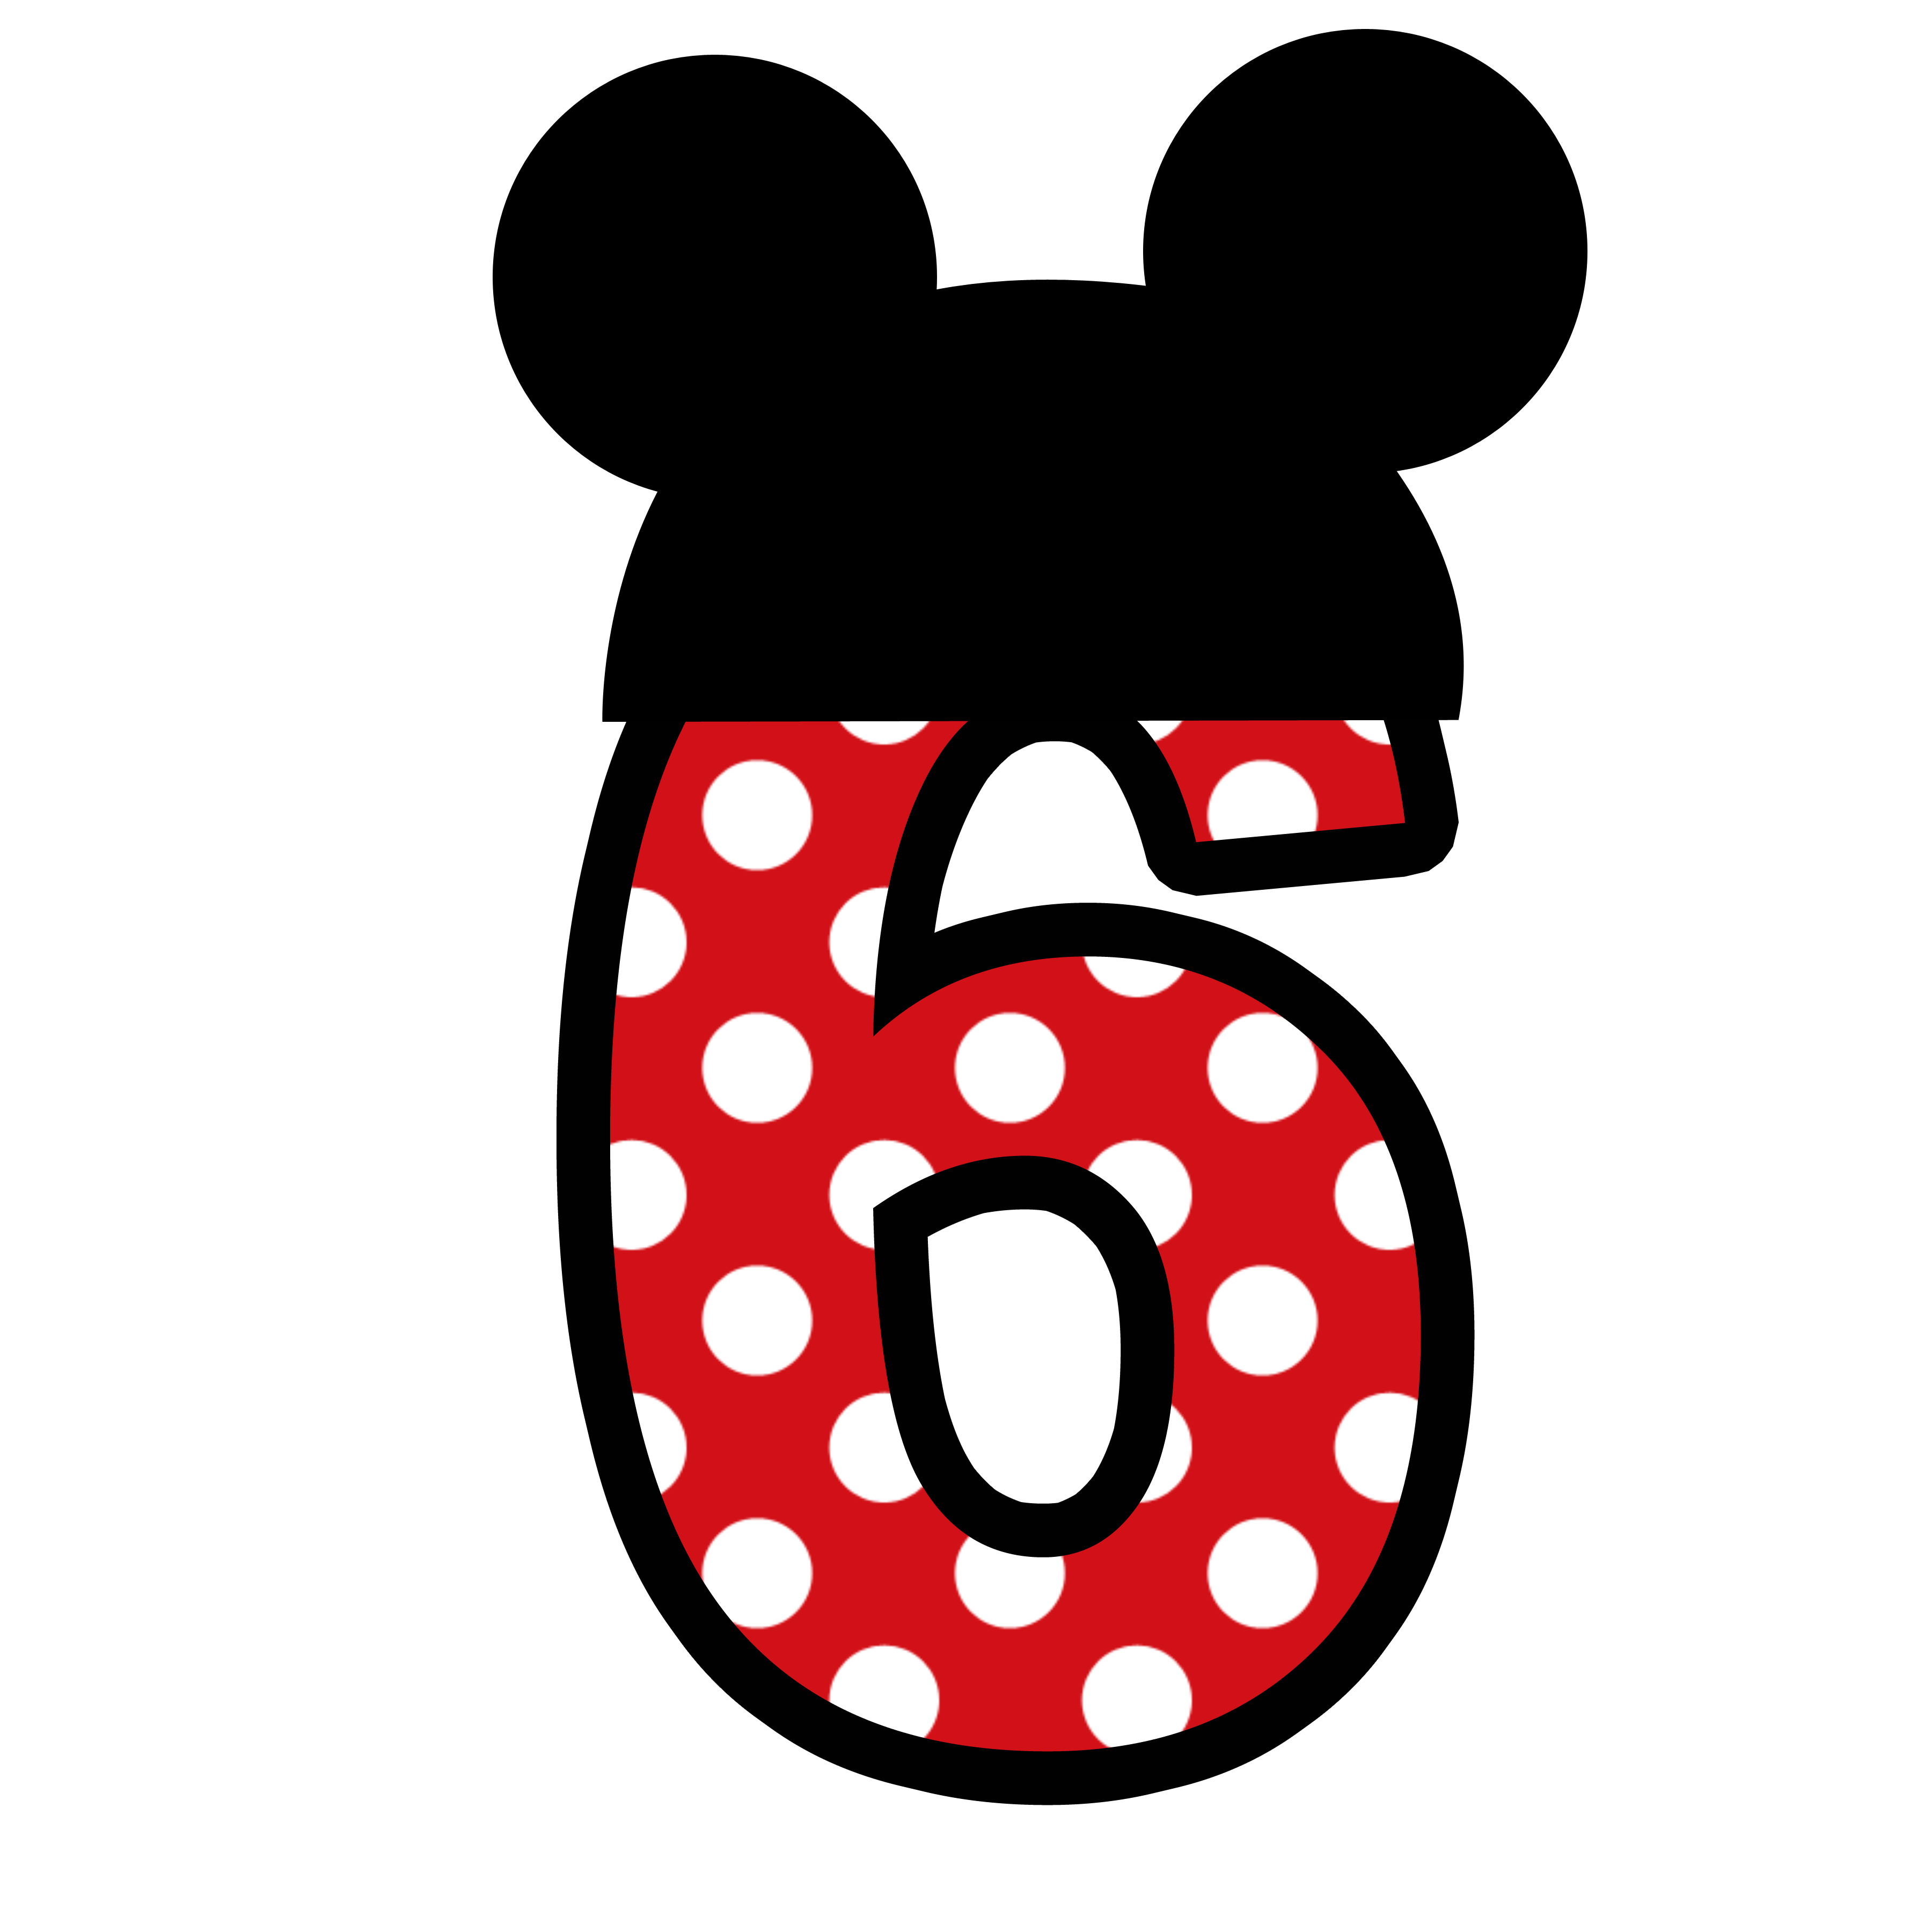 clipart numbers minnie mouse